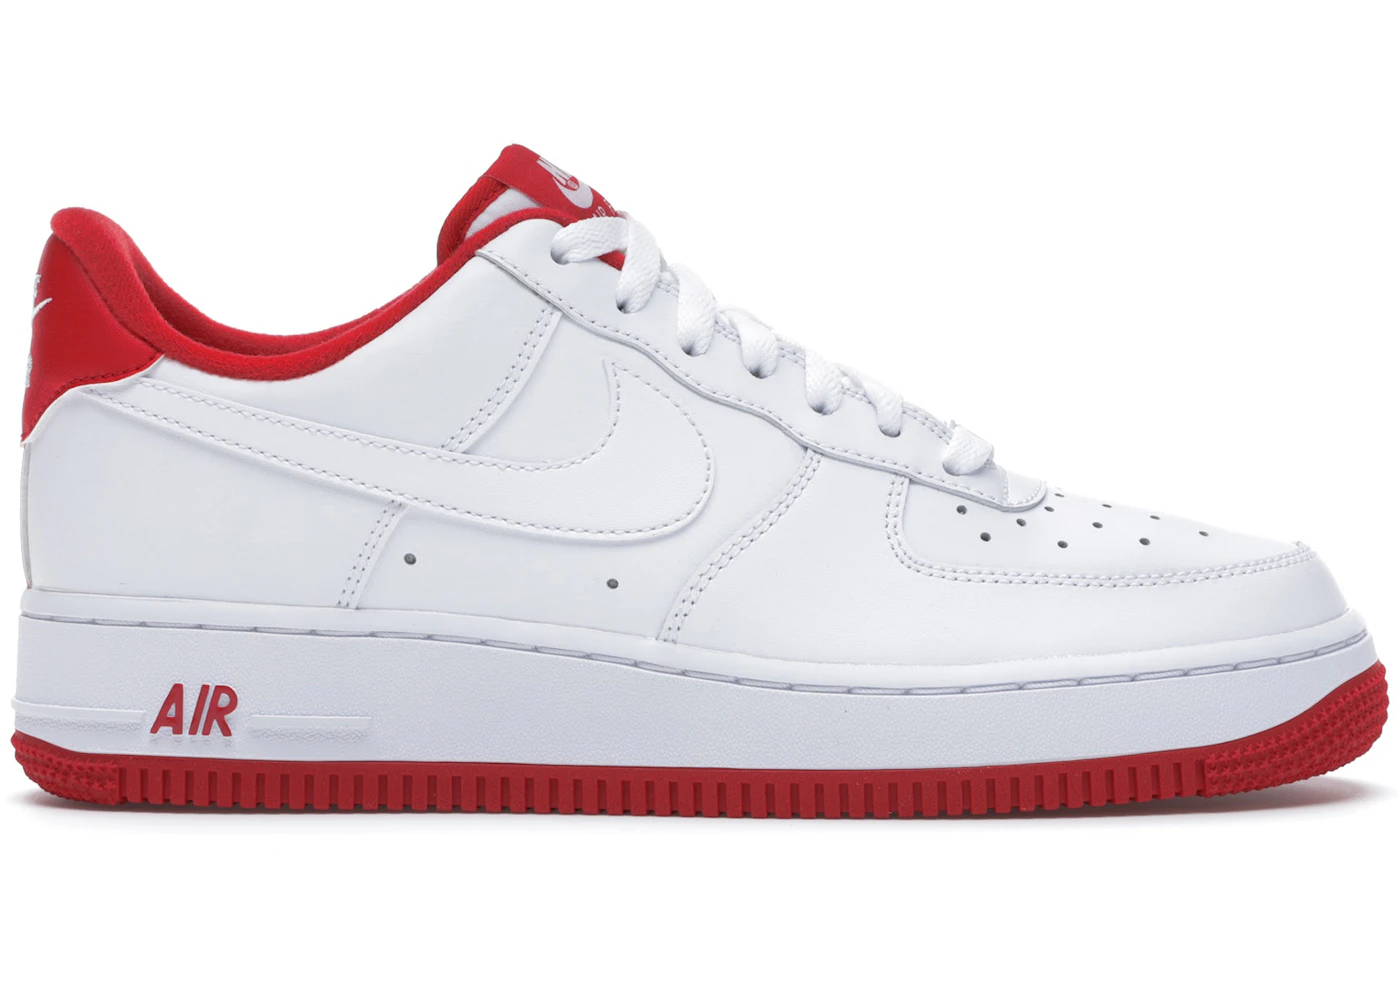 Mere Brobrygge Derfor Nike Air Force 1 Low White University Red Men's - CD0884-101 - US